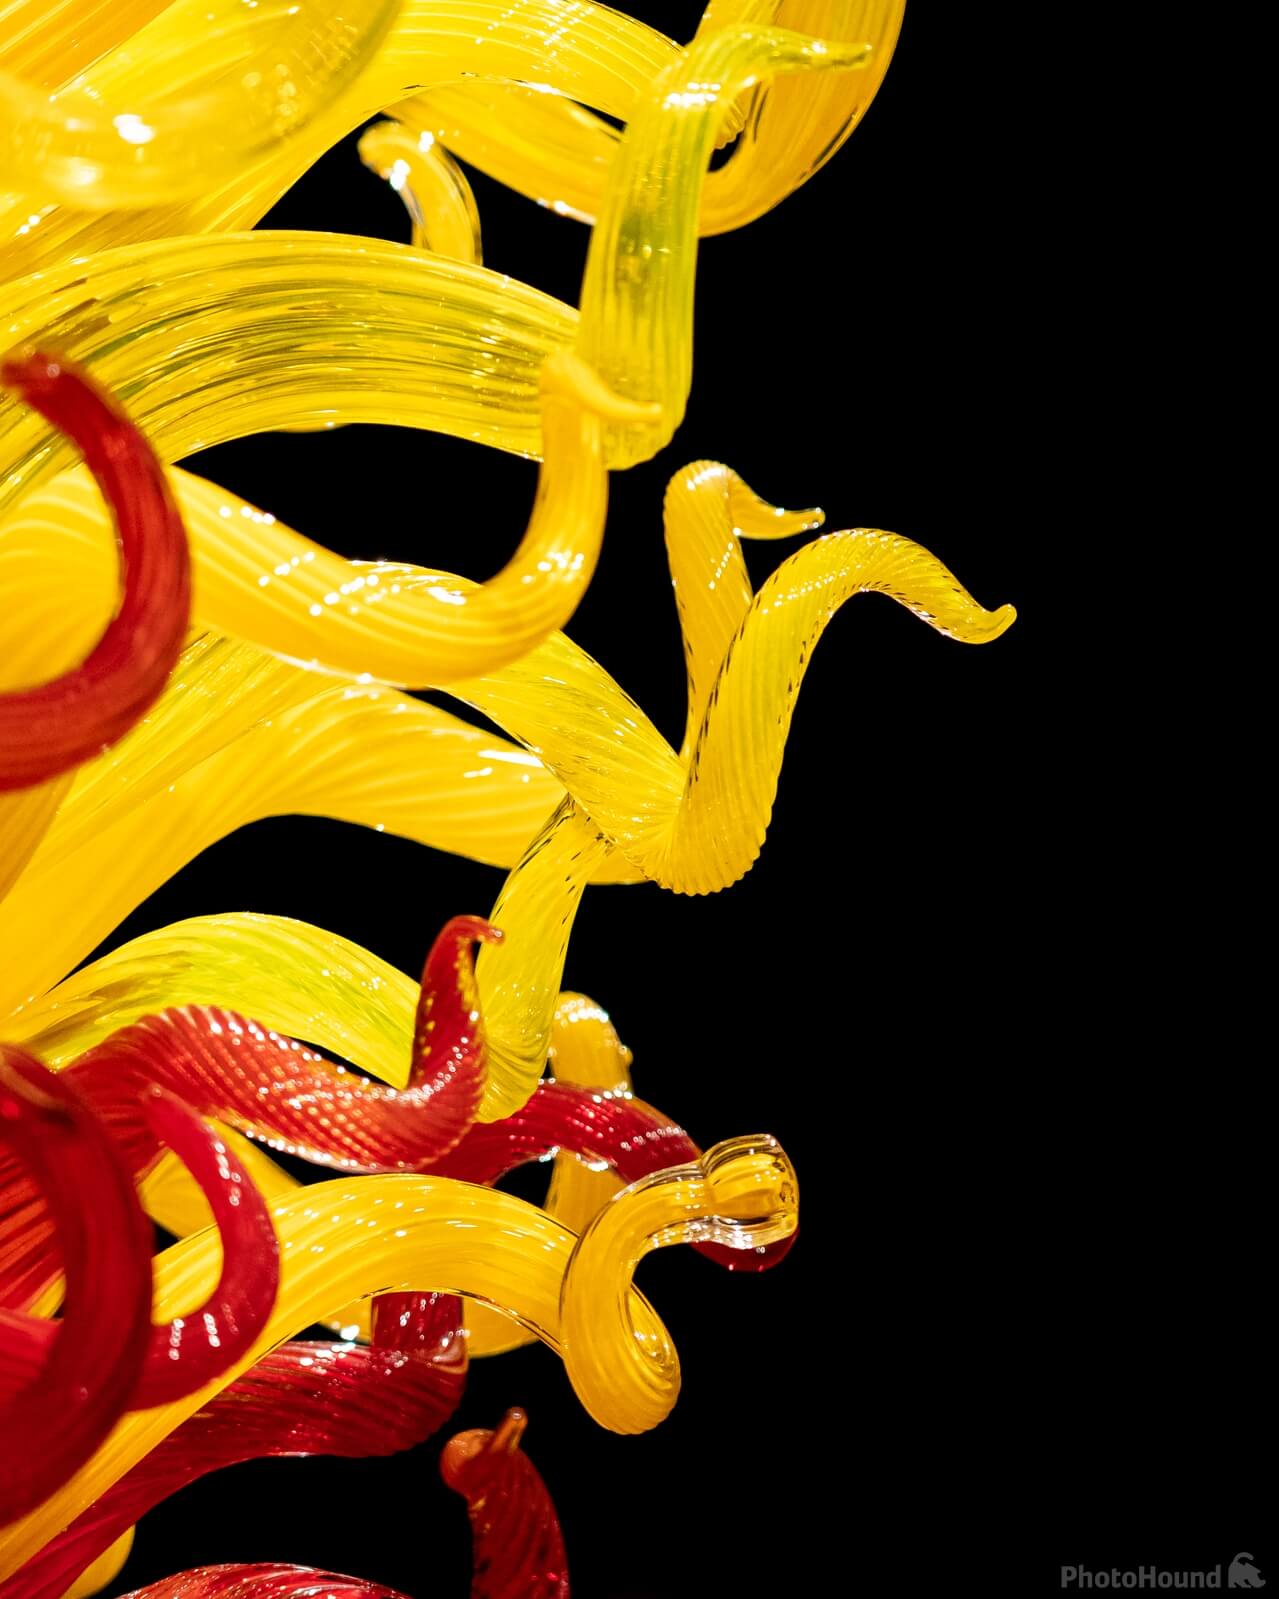 Image of The Chihuly Garden and Glass – Seattle Center by Adams Rosales